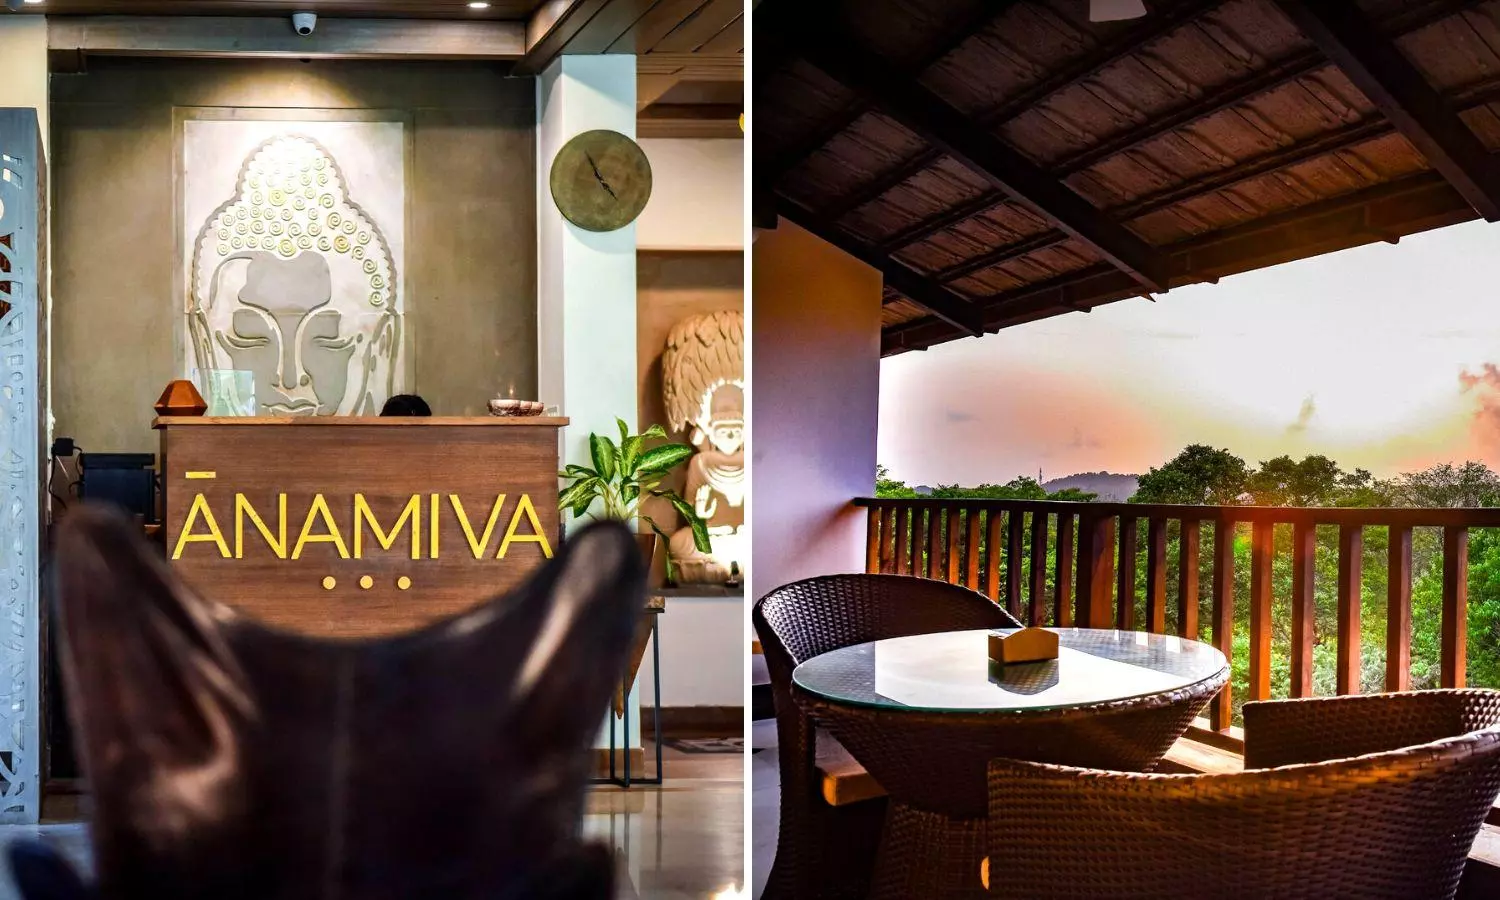 Ānamiva Hotel in Goa is a quiet oasis of rest, rejuvenation and comfort